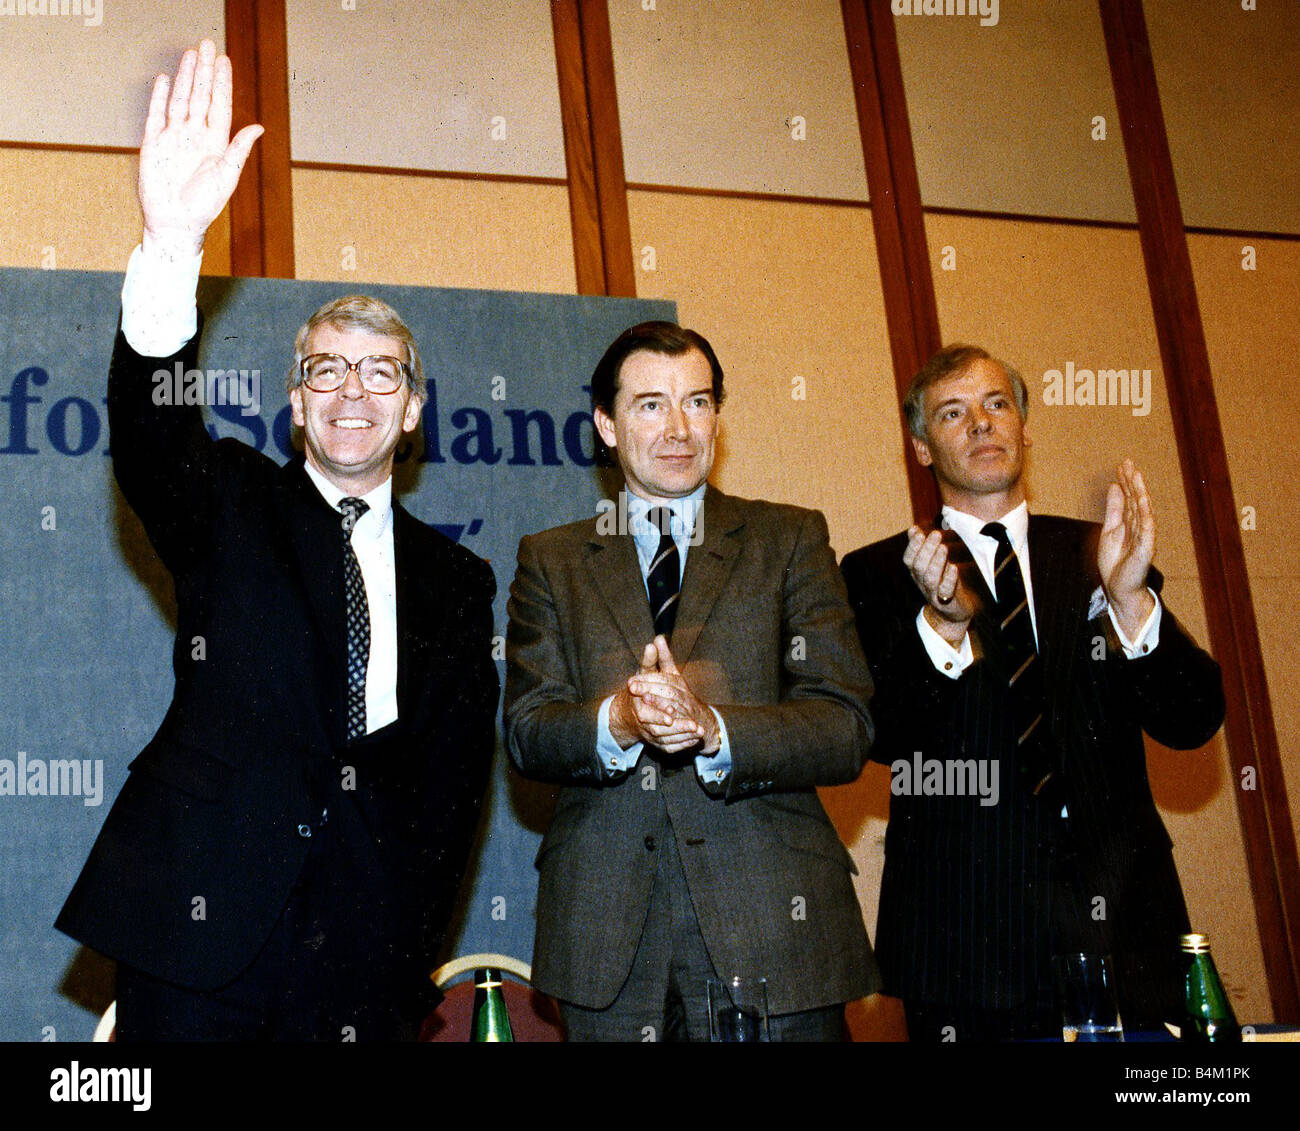 John Major Prime Minister in Moat House Hotel Glasgow waving and being applauded by Ian Lang and Michael Hirst Circa 1992 Stock Photo